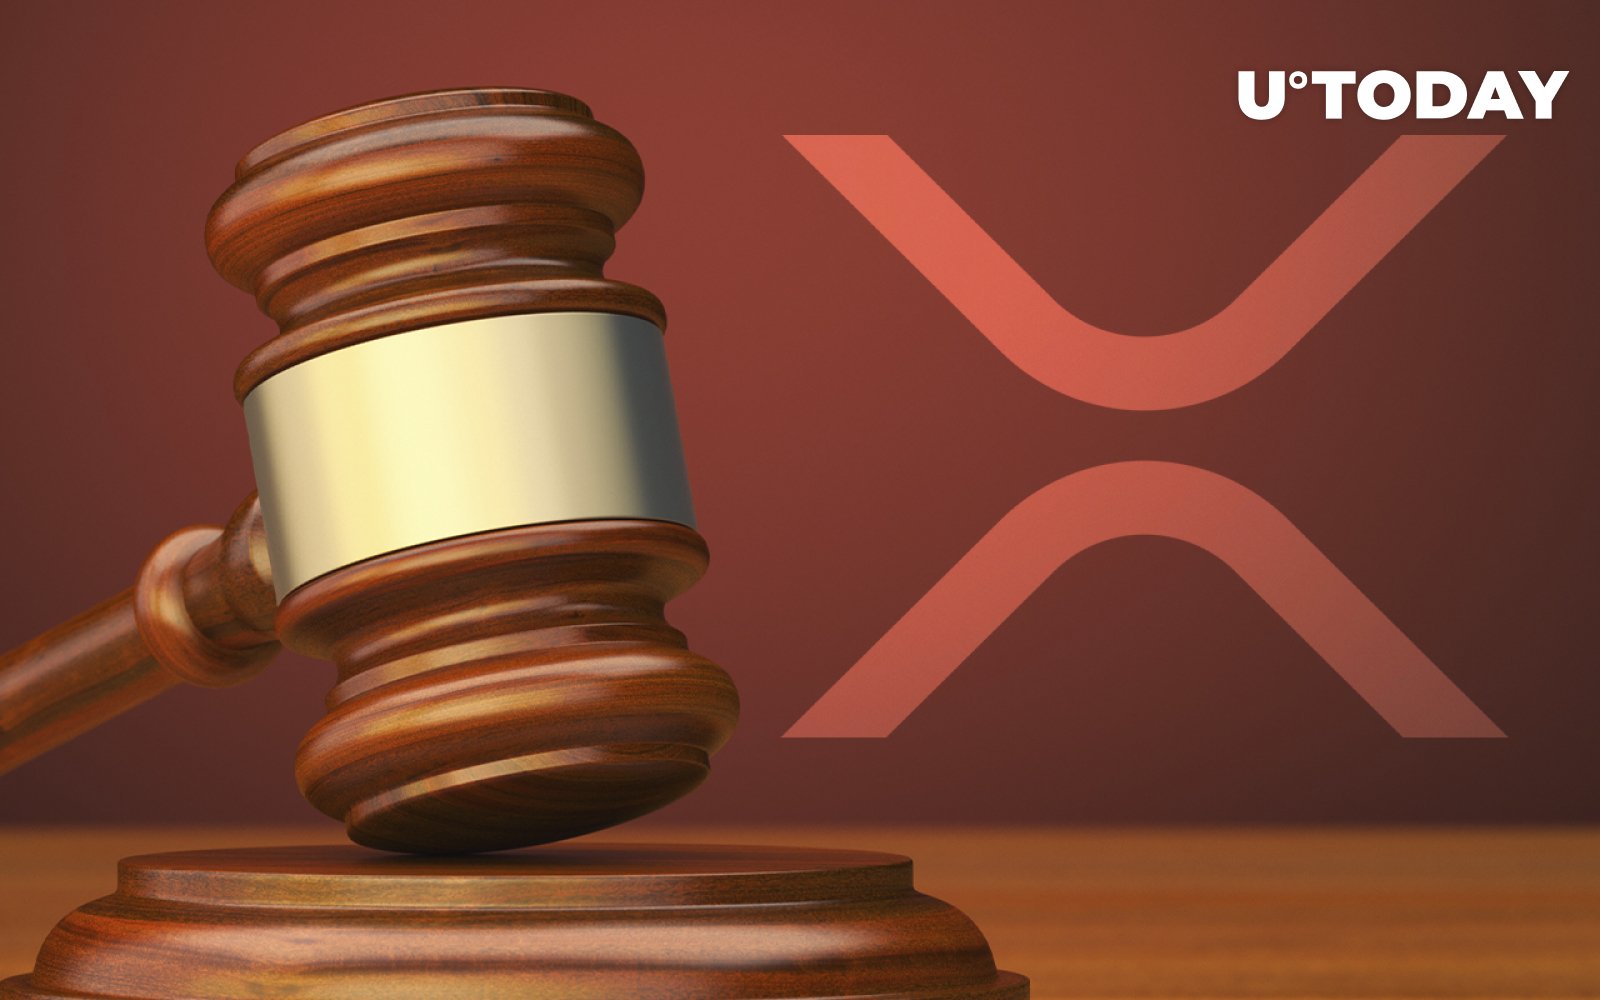 XRP Lawsuit Cryptolaw Founder Gives Timeline for Settlement